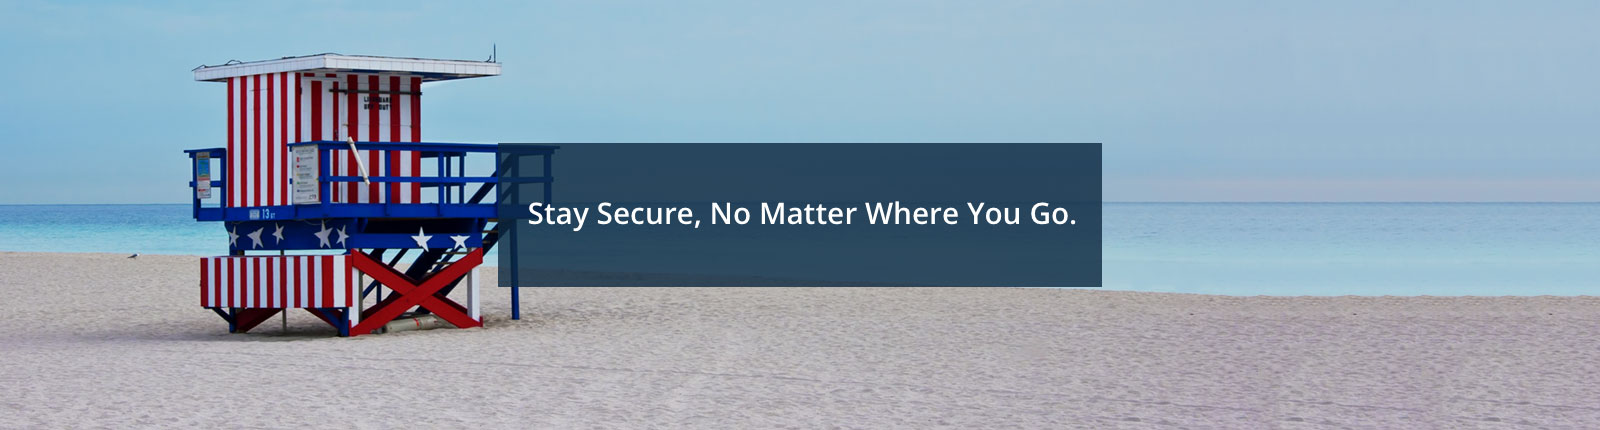 Stay Secure, No Matter Where You Go